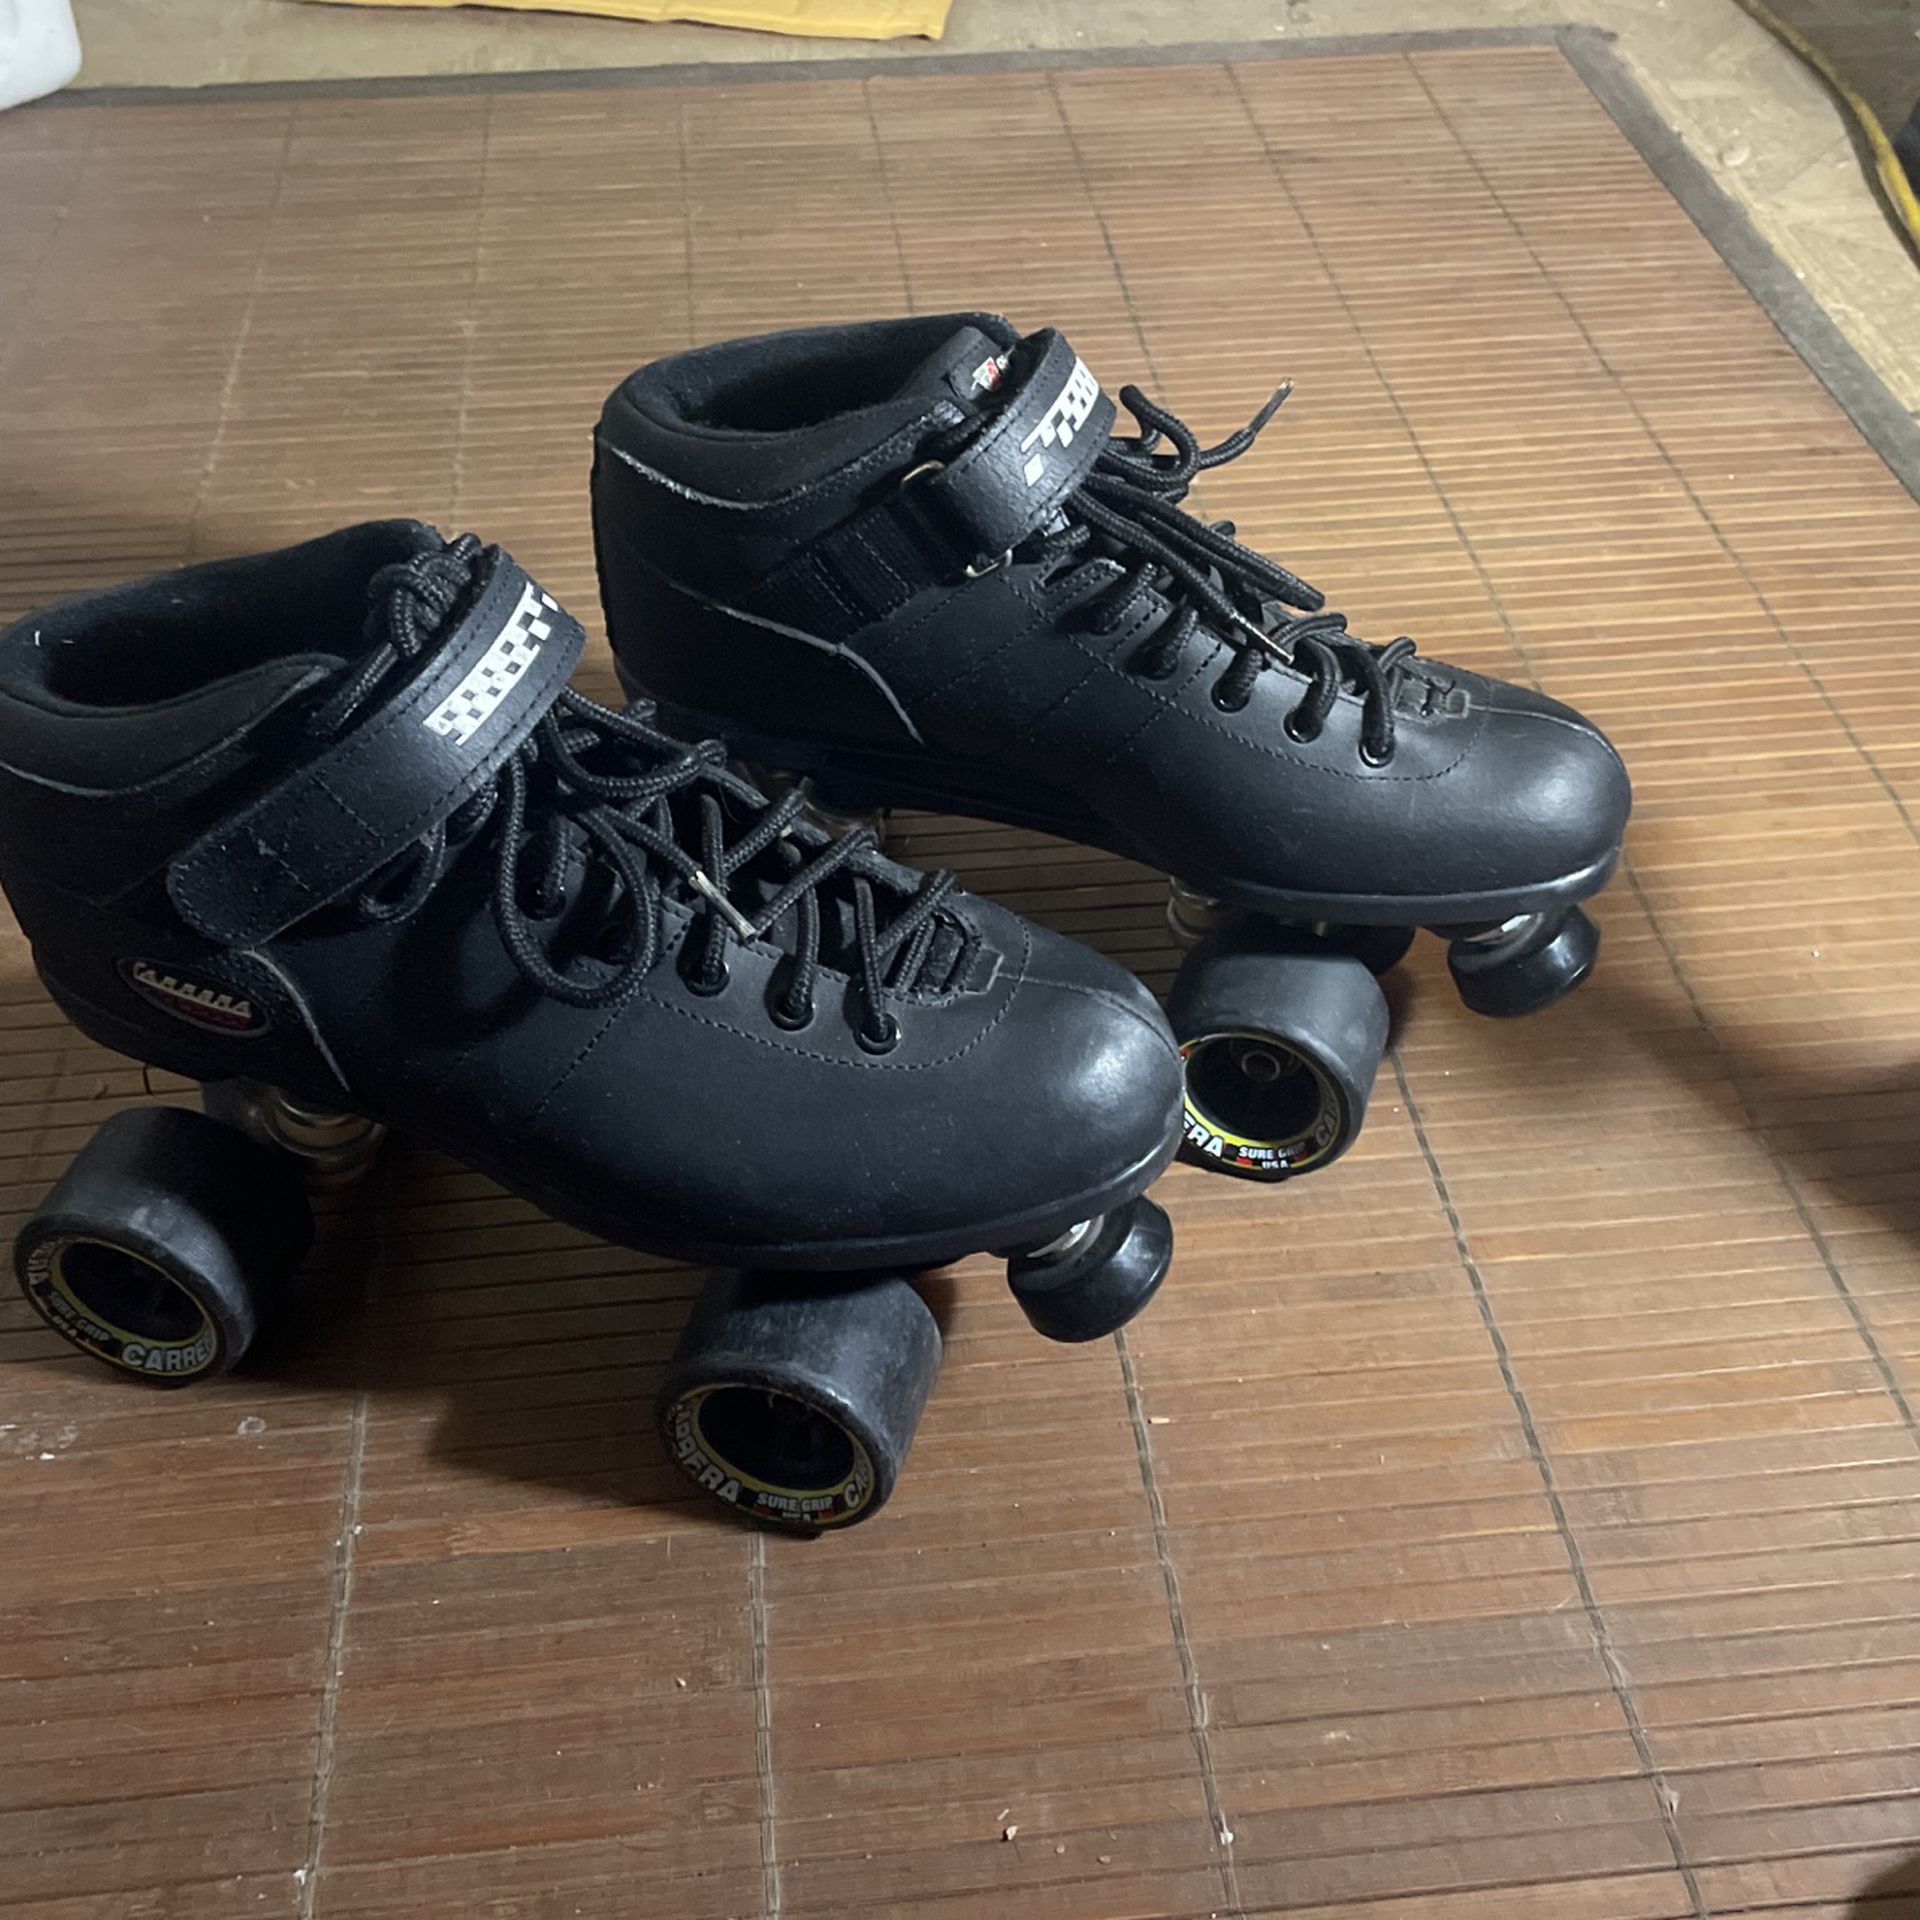 Riedell Carrera Rolling Skates for Sale in San Antonio, TX - OfferUp